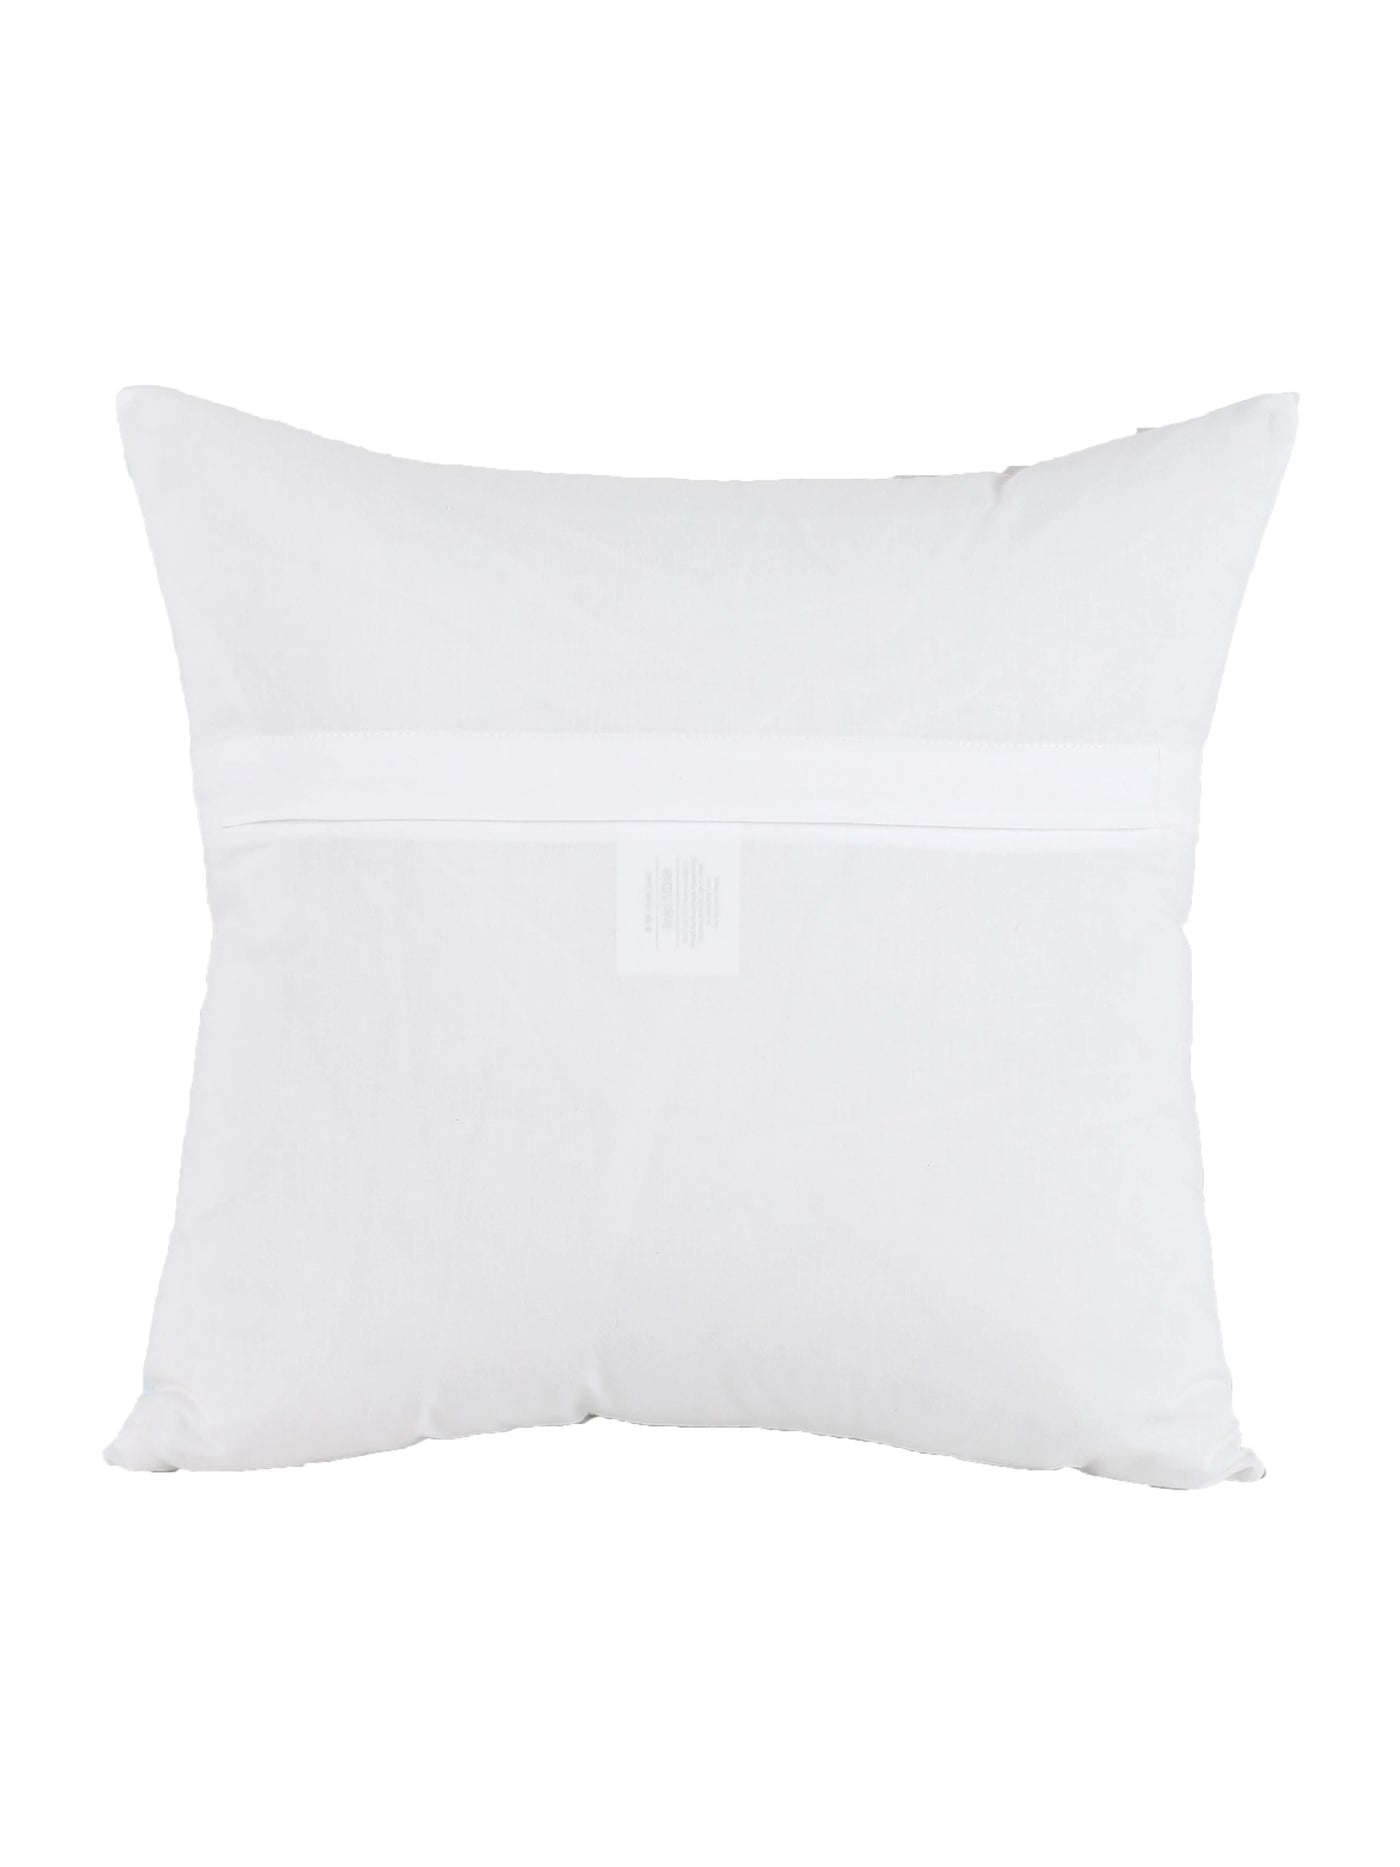 The Wright Flyer Cushion Cover